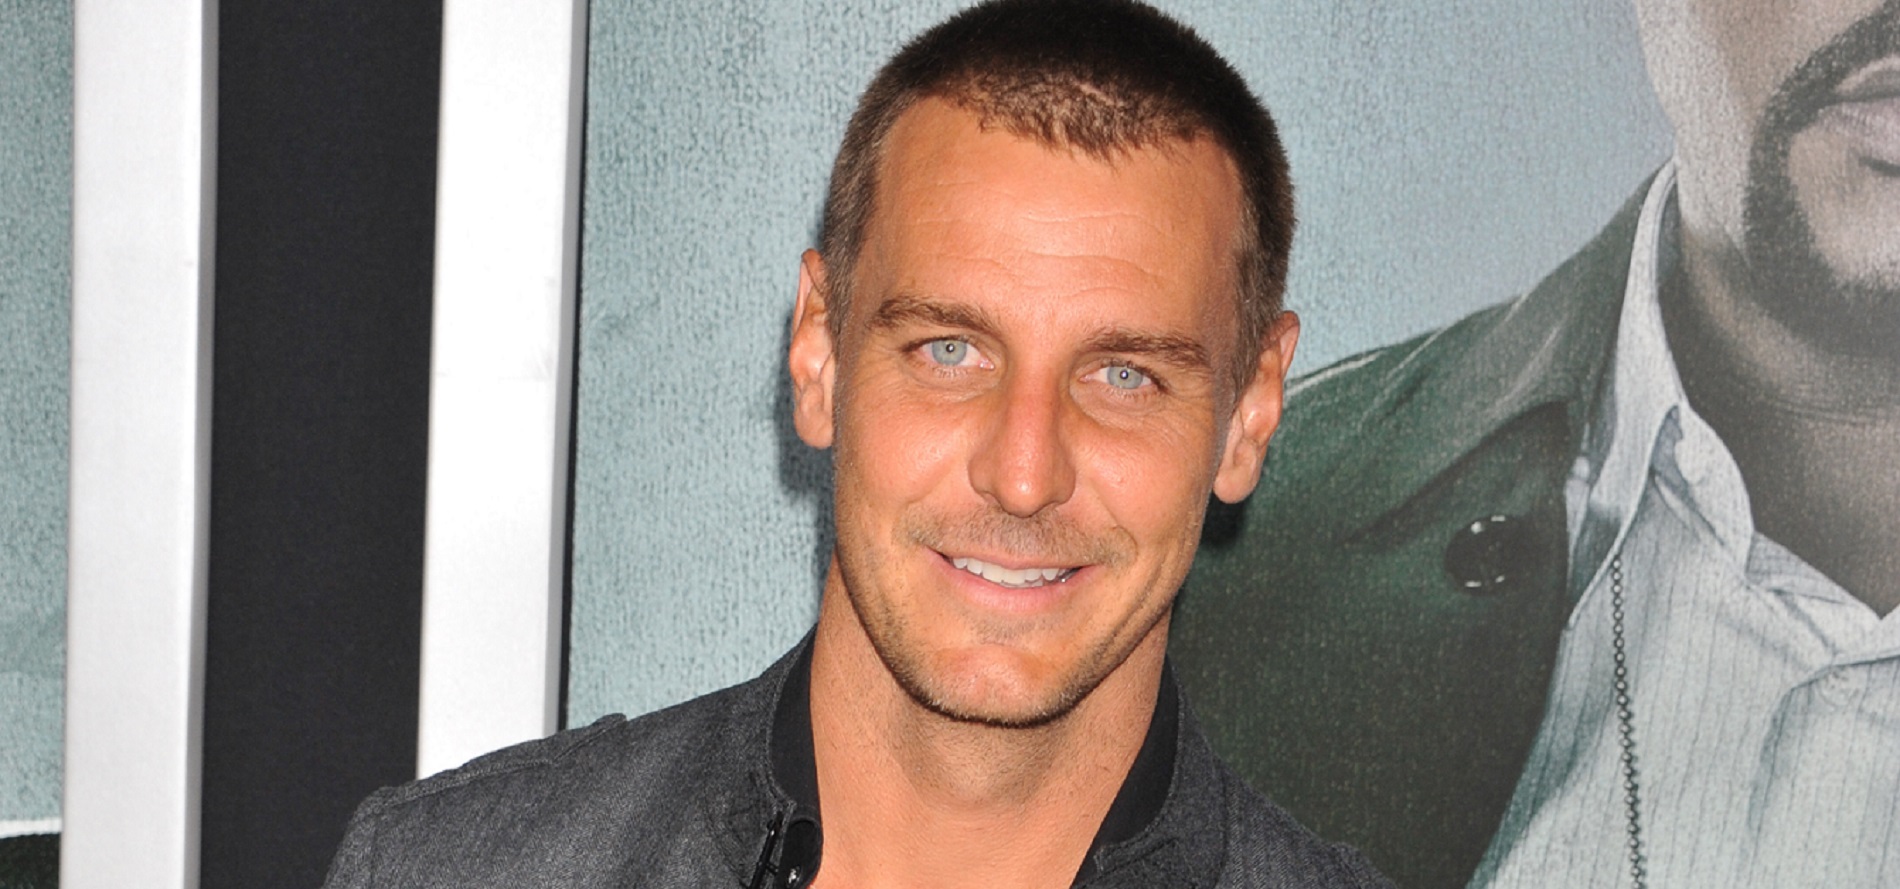 General Hospital star Ingo Rademacher is pictured here in a grey T-shirt